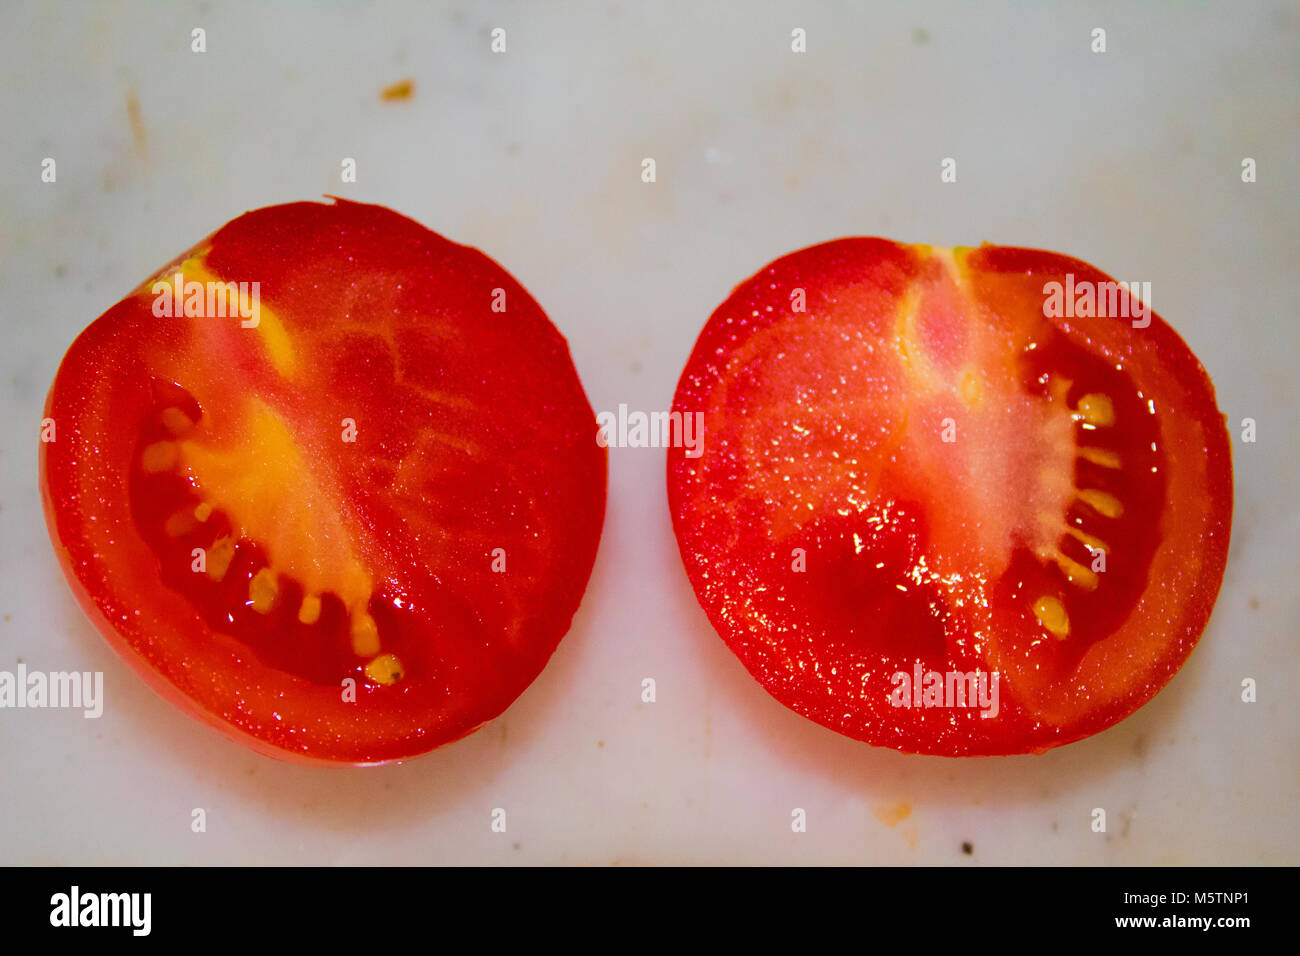 It is a tomato Stock Photo